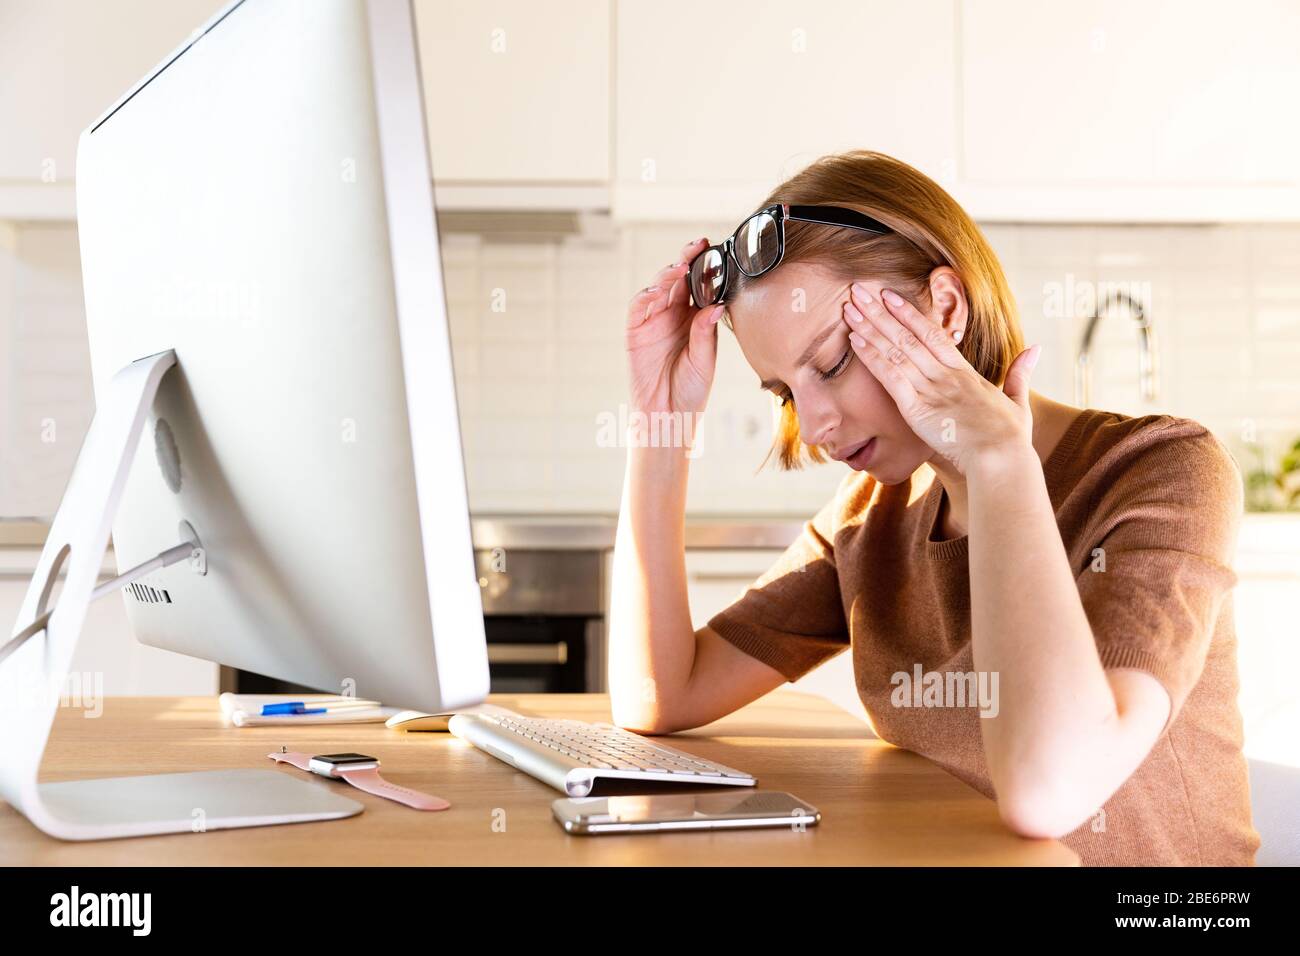 Tired woman freelancer has a headache, touching her temple after long work at computer during the period of self-isolation and remote work at home. Fa Stock Photo